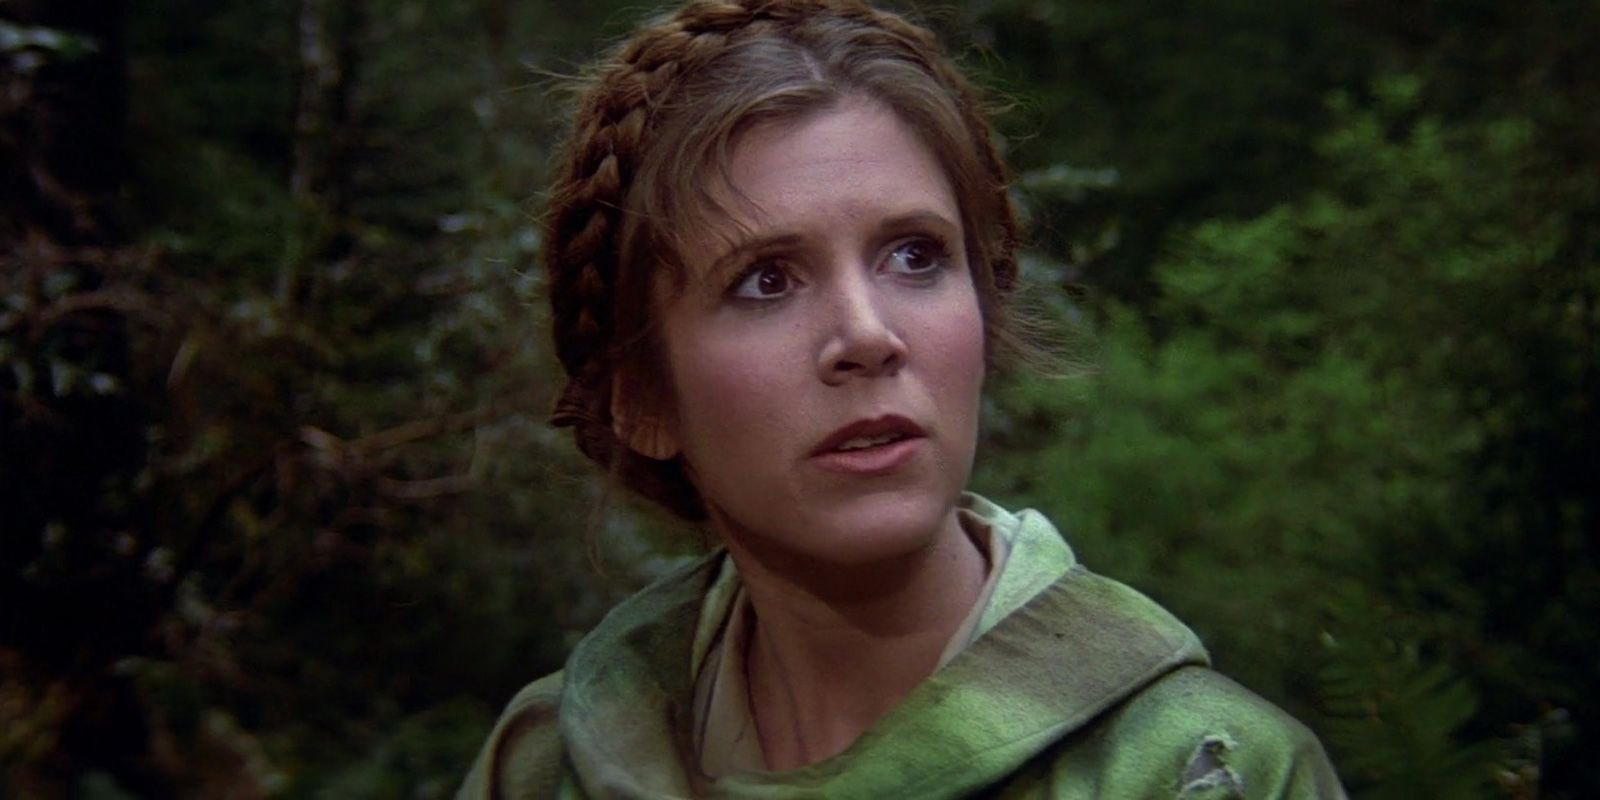 Happy birthday 65th to Carrie Fisher. Our Princess Leia Organa. We miss u       